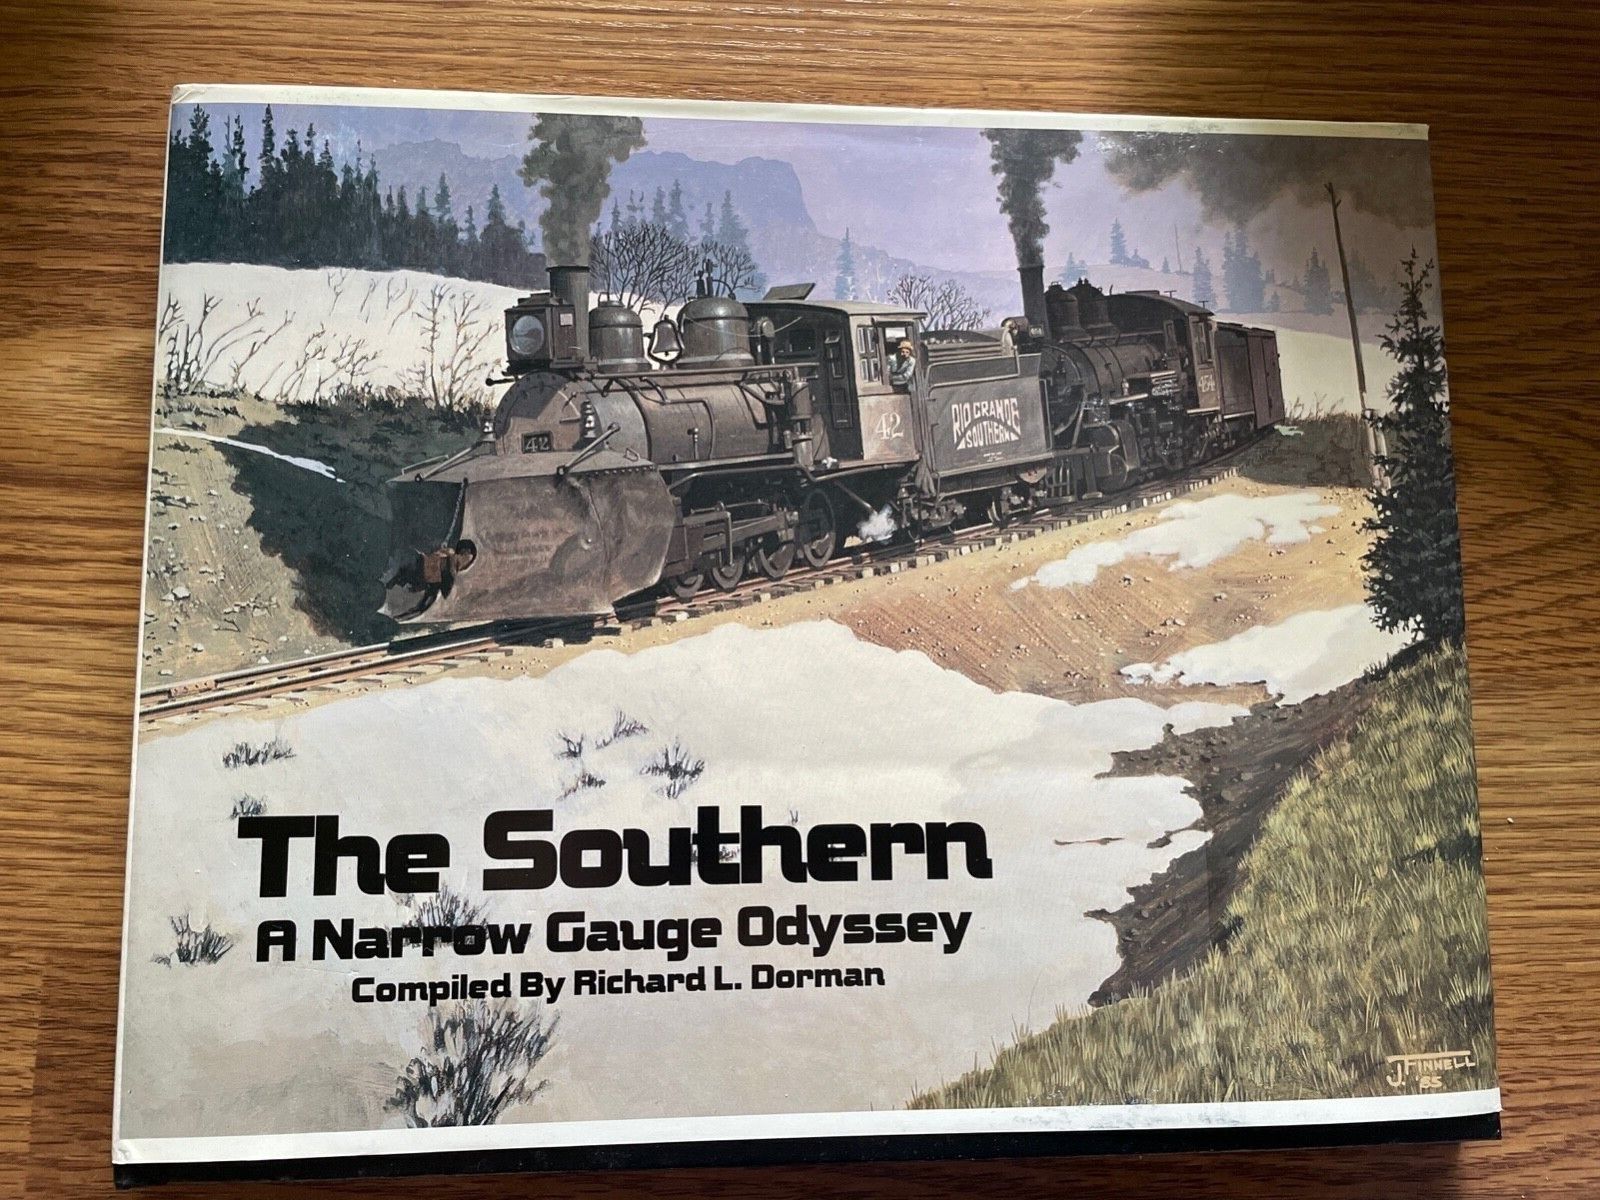 The Southern A Narrow Gauge Odyssey Volume 1 Compiled By Richard L. Dorman